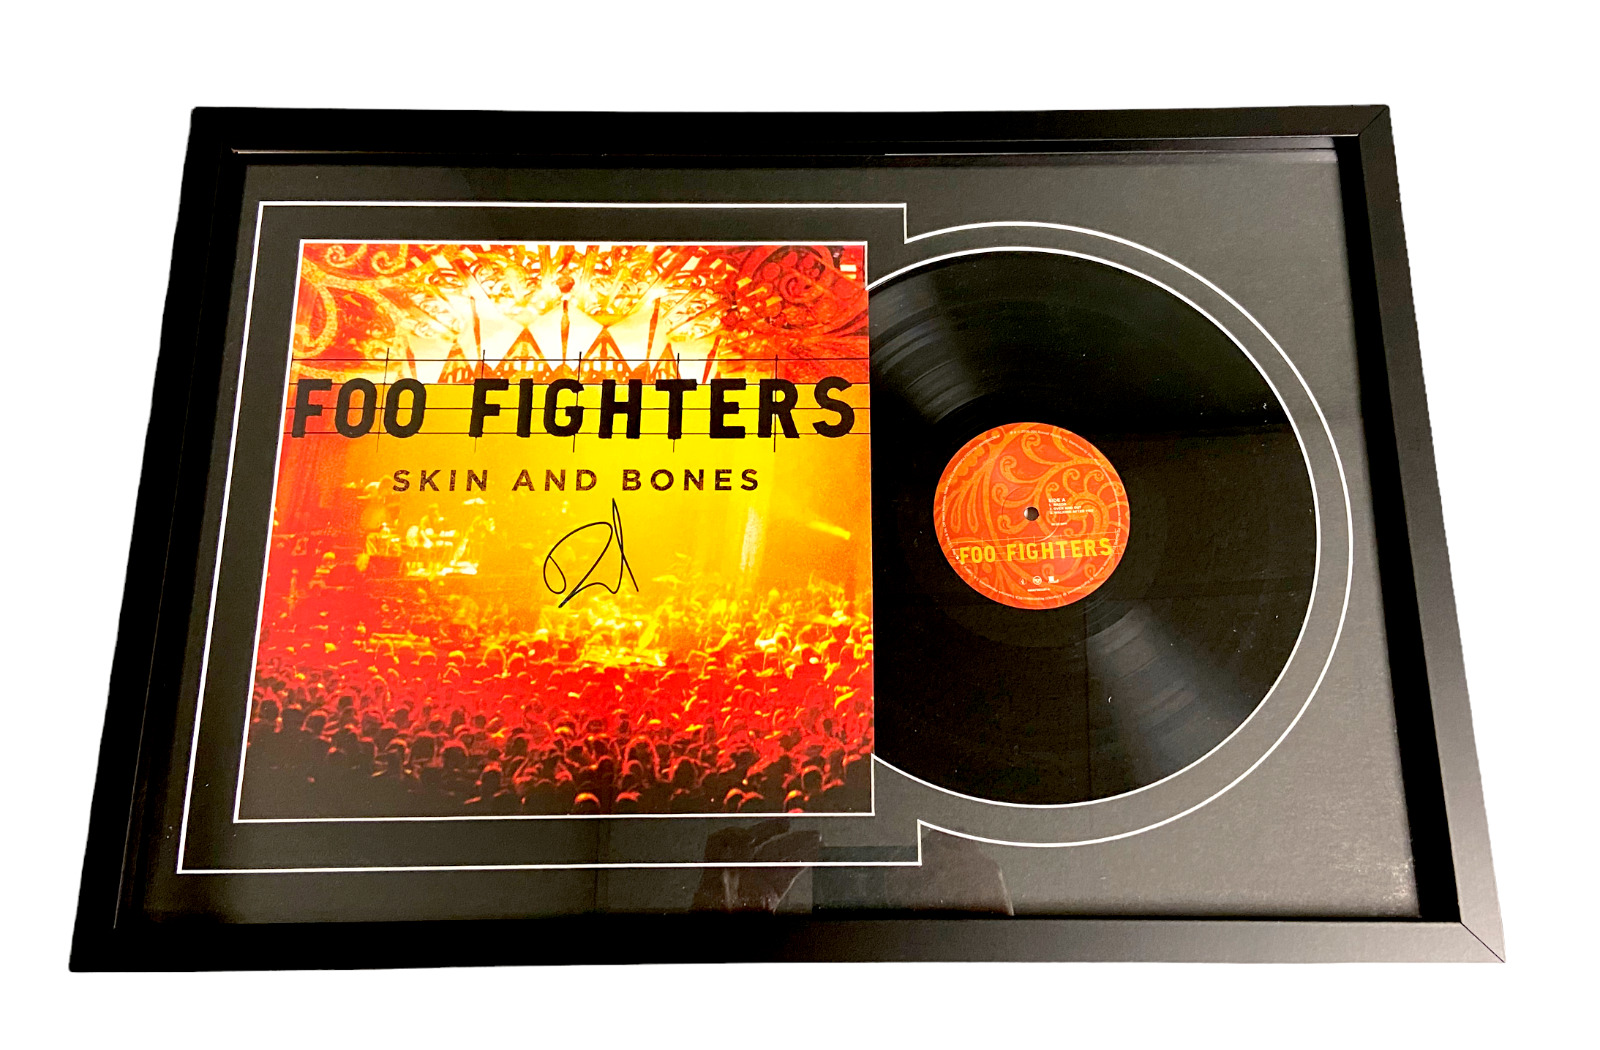 DAVE GROHL SIGNED FRAMED AUTOGRAPH FOO FIGHTERS SKIN AND BONES VINYL LP BECKETT